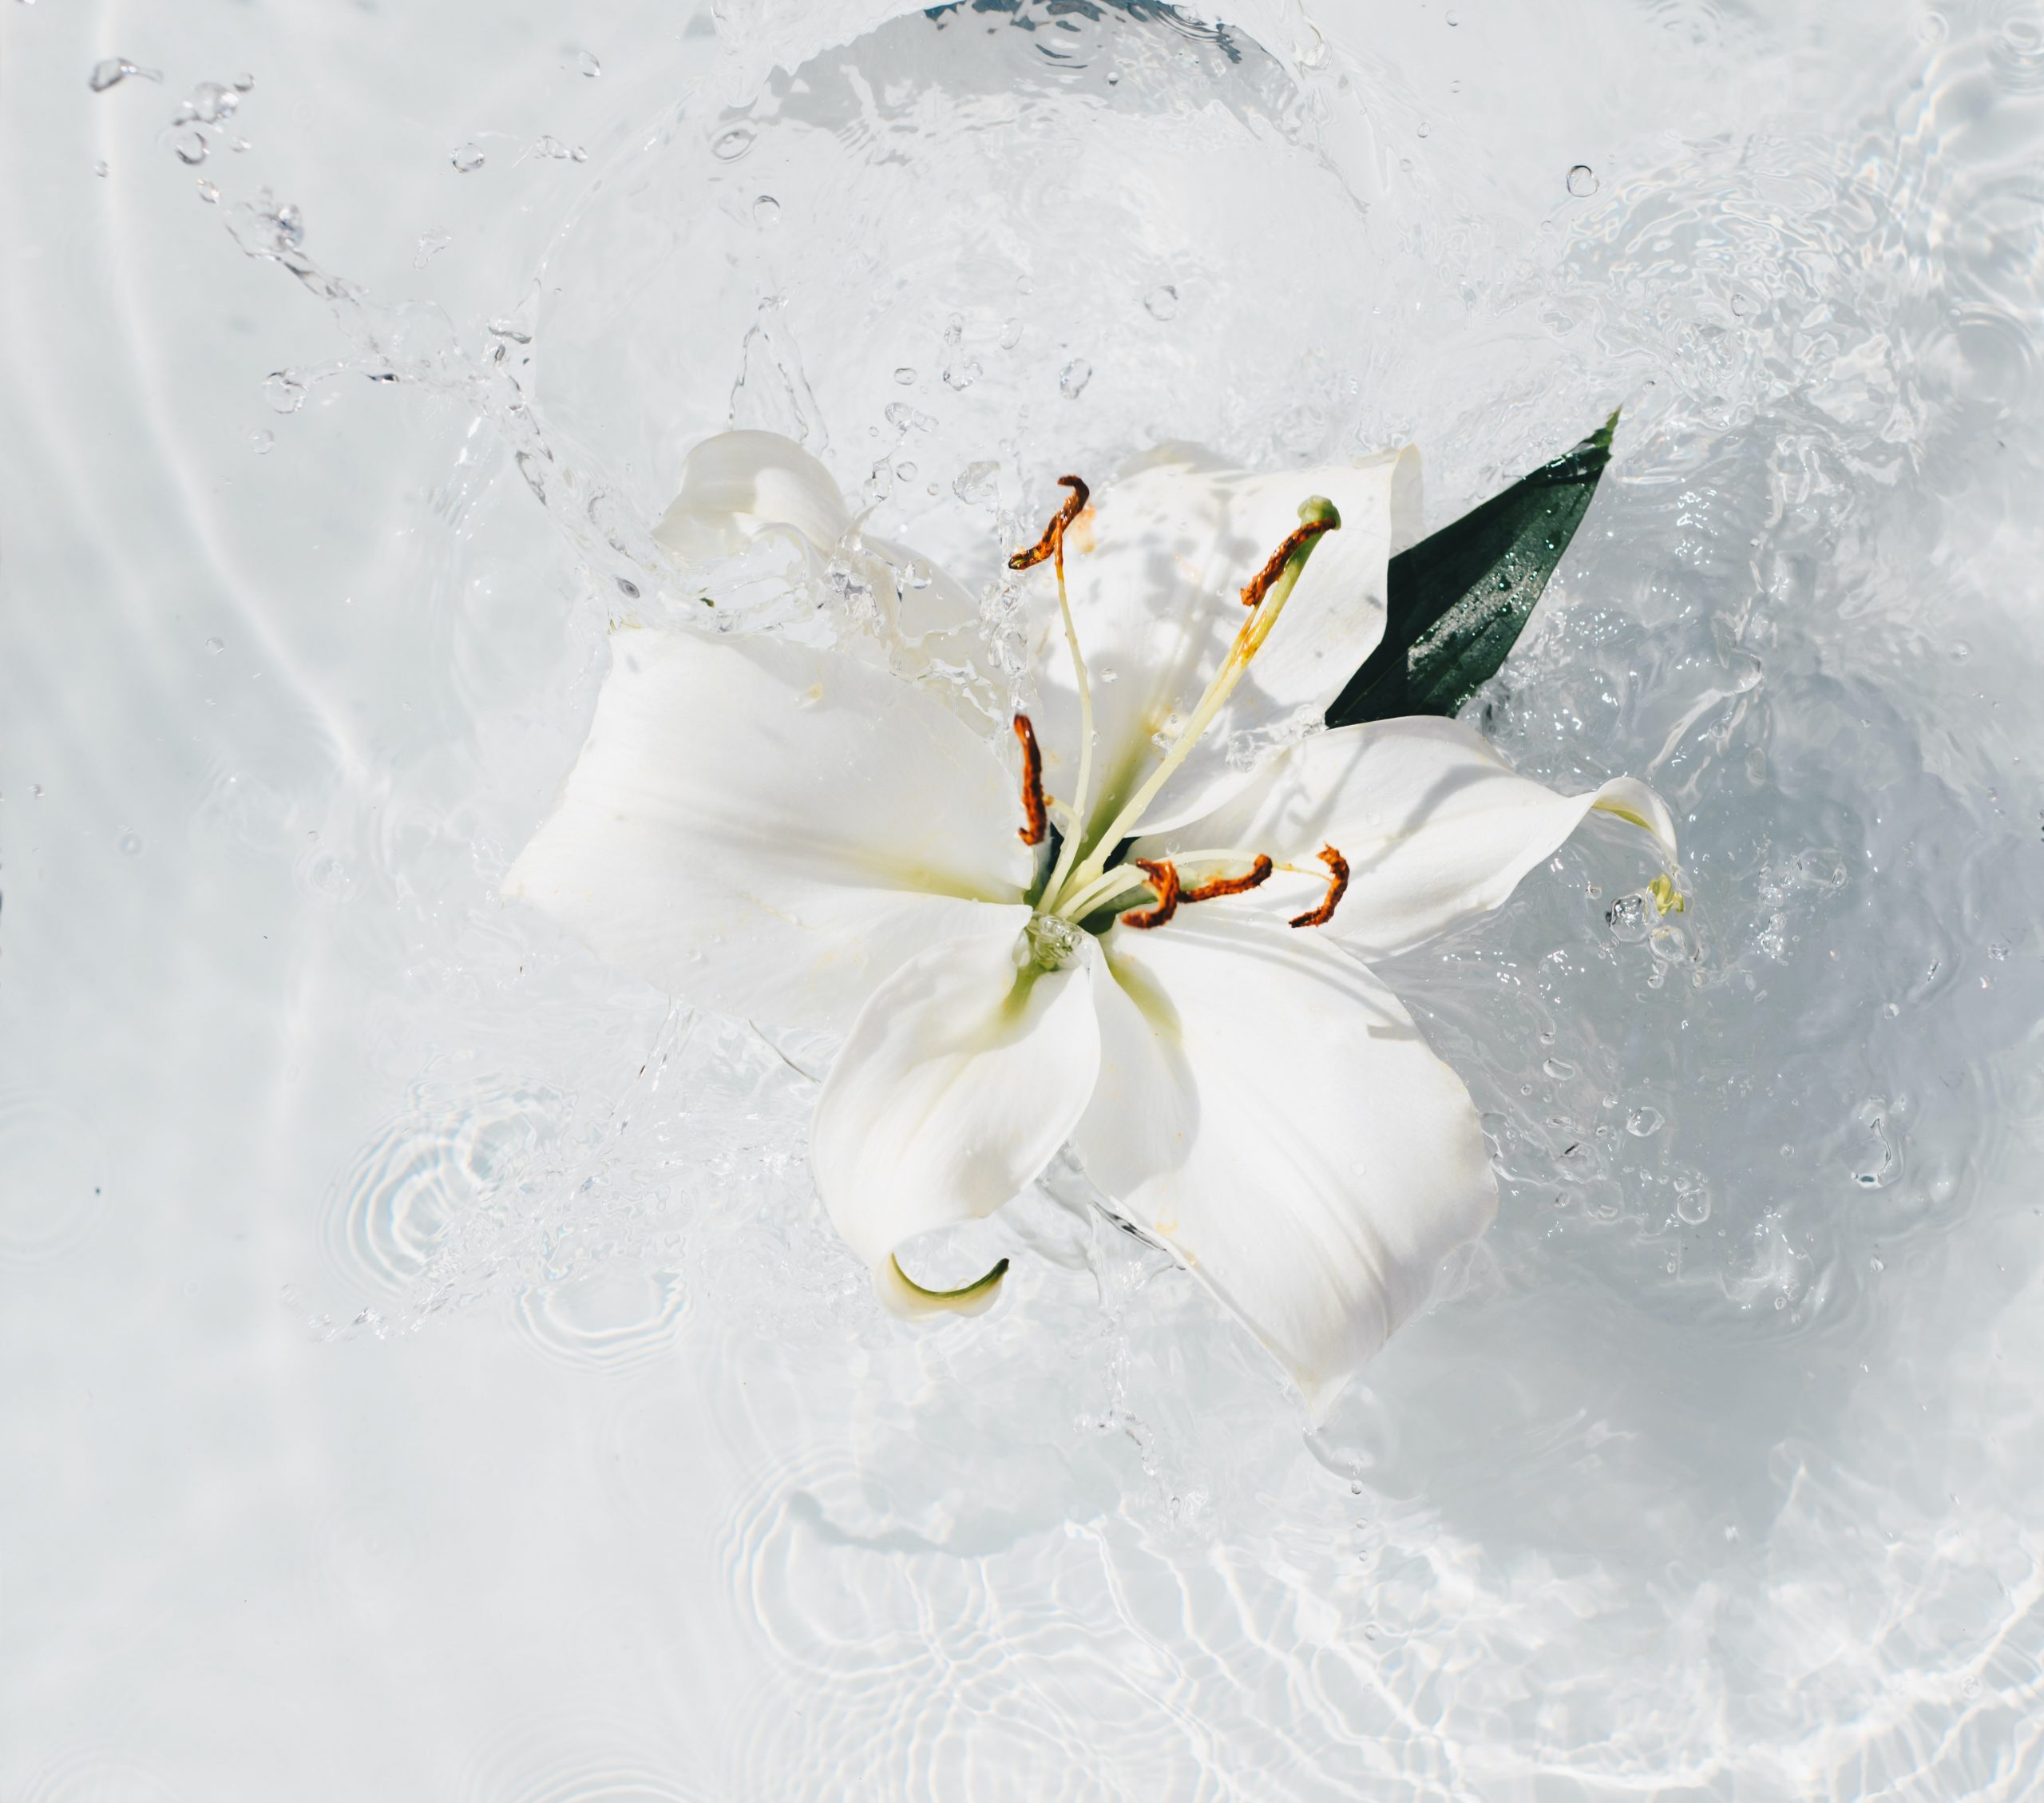 A lily in water